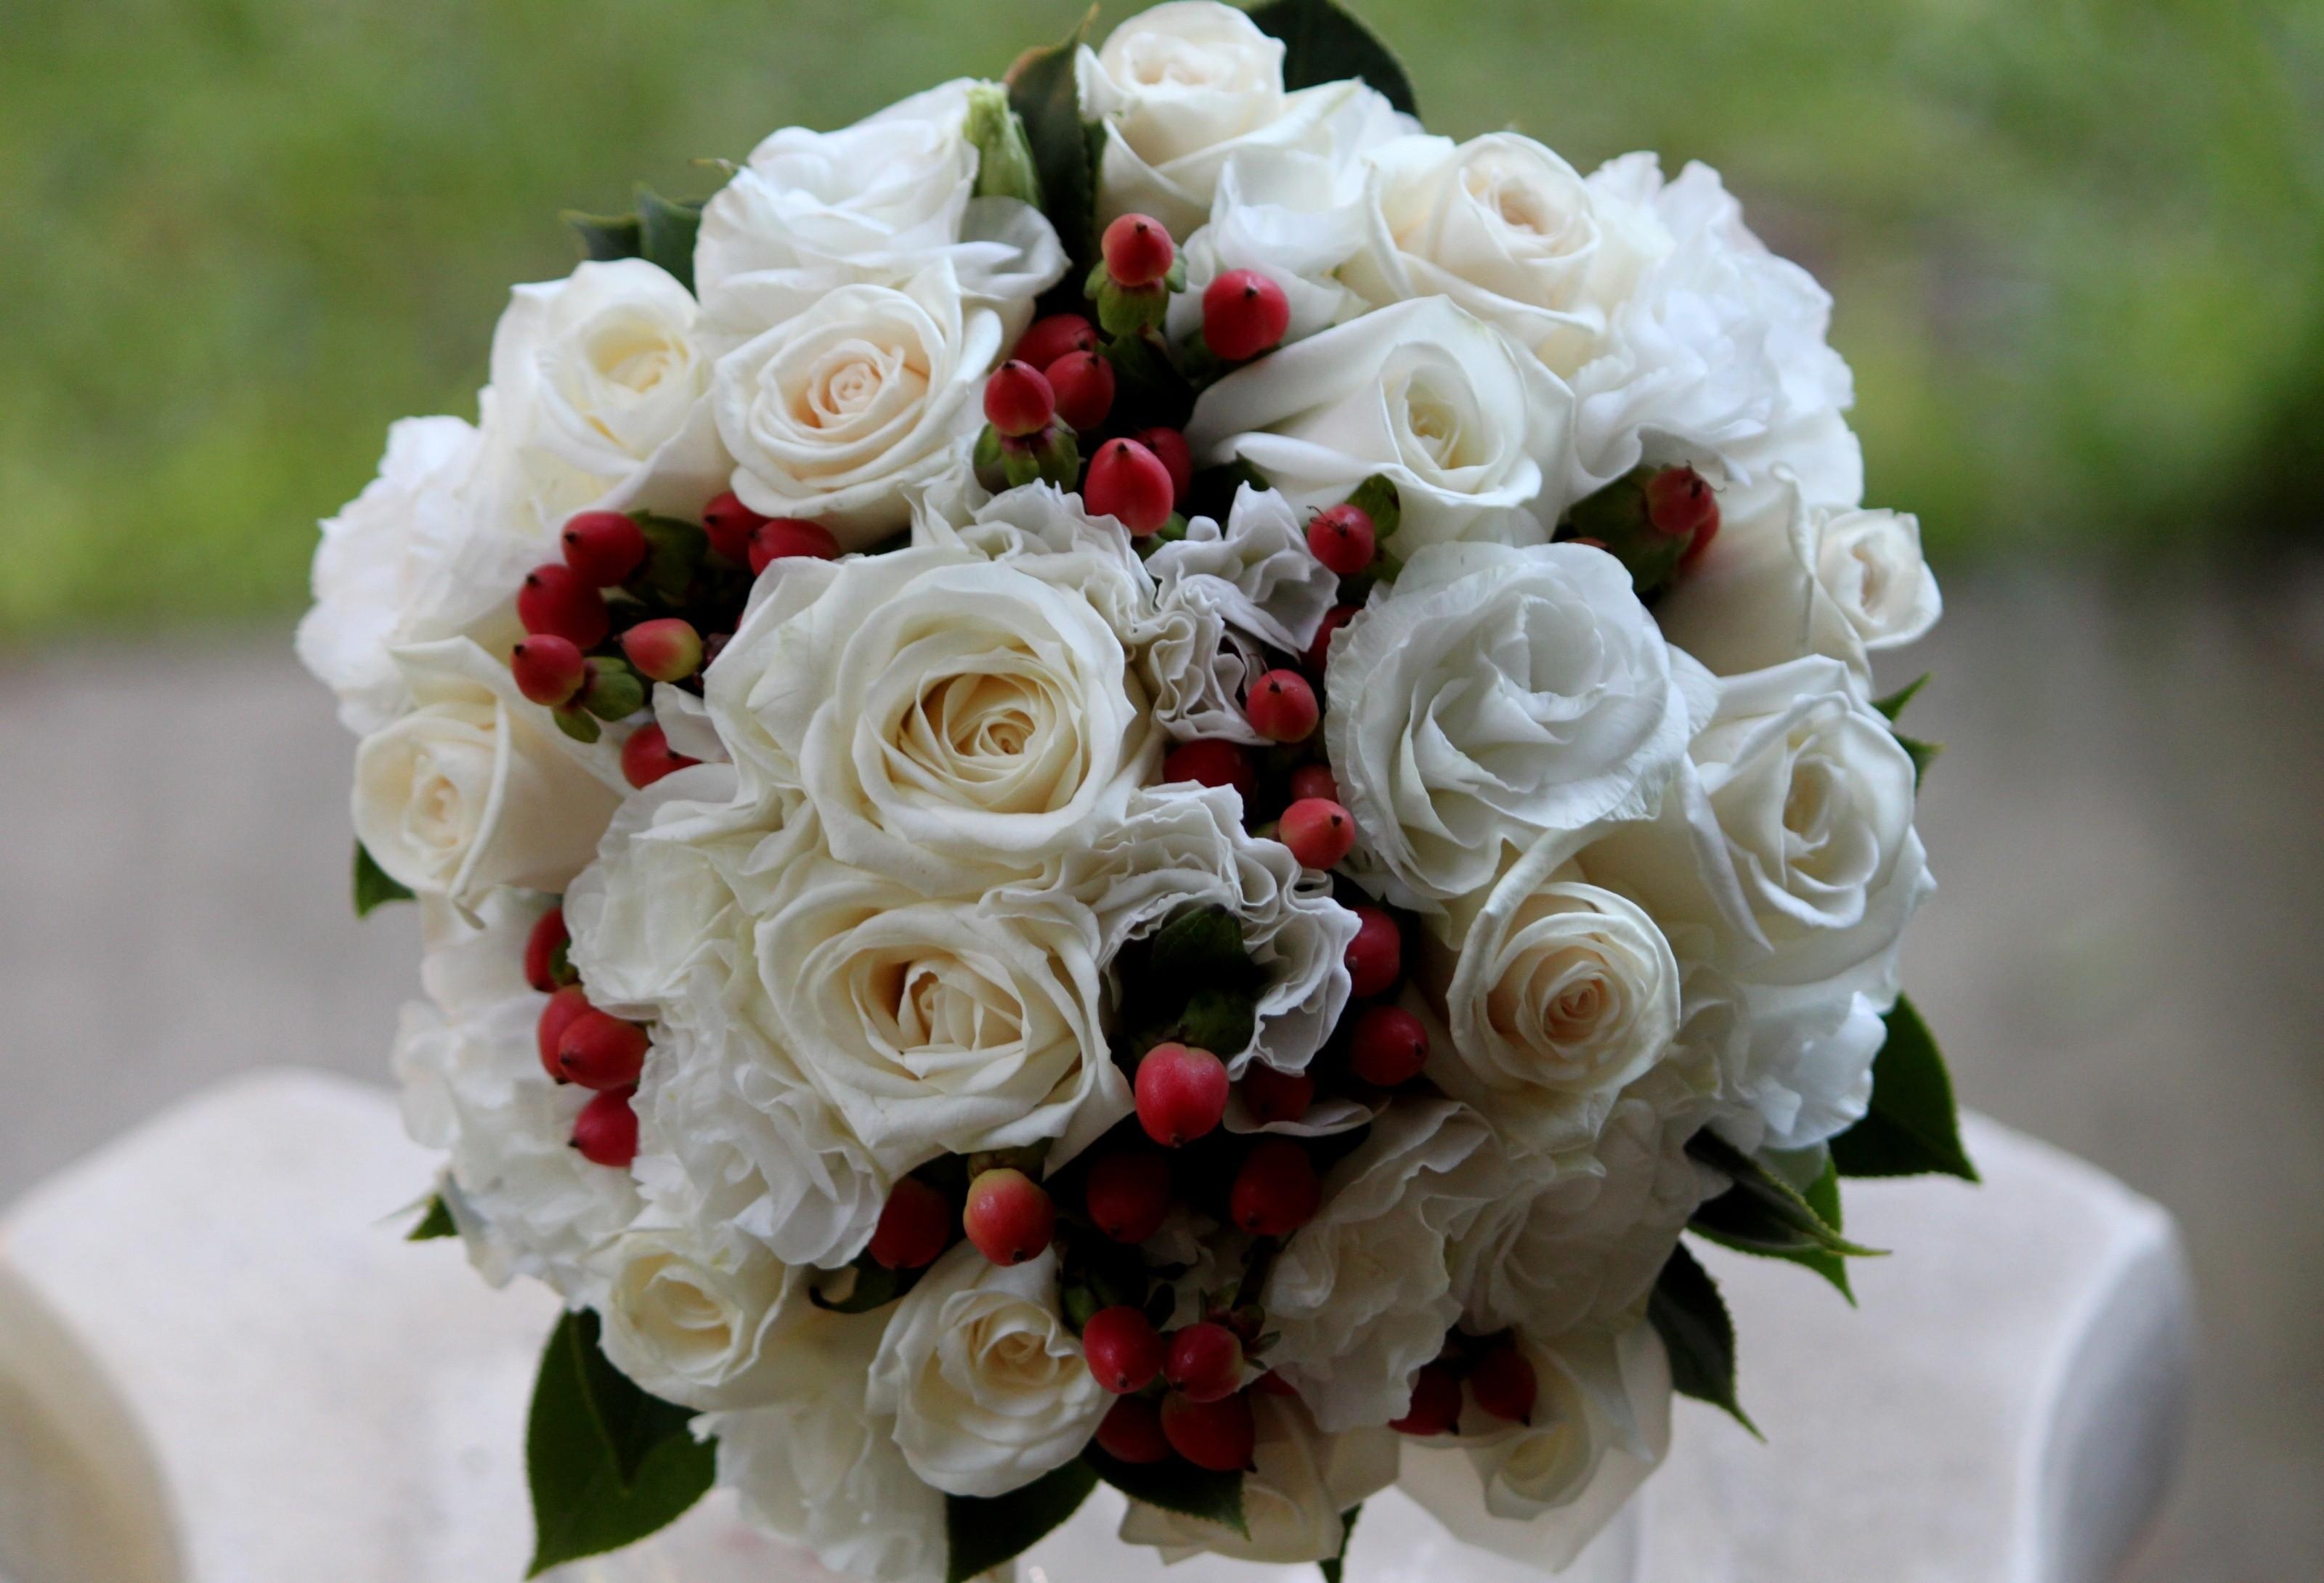 typography, flowers, roses, berries, registration, bouquet, handsomely, it's beautiful Full HD